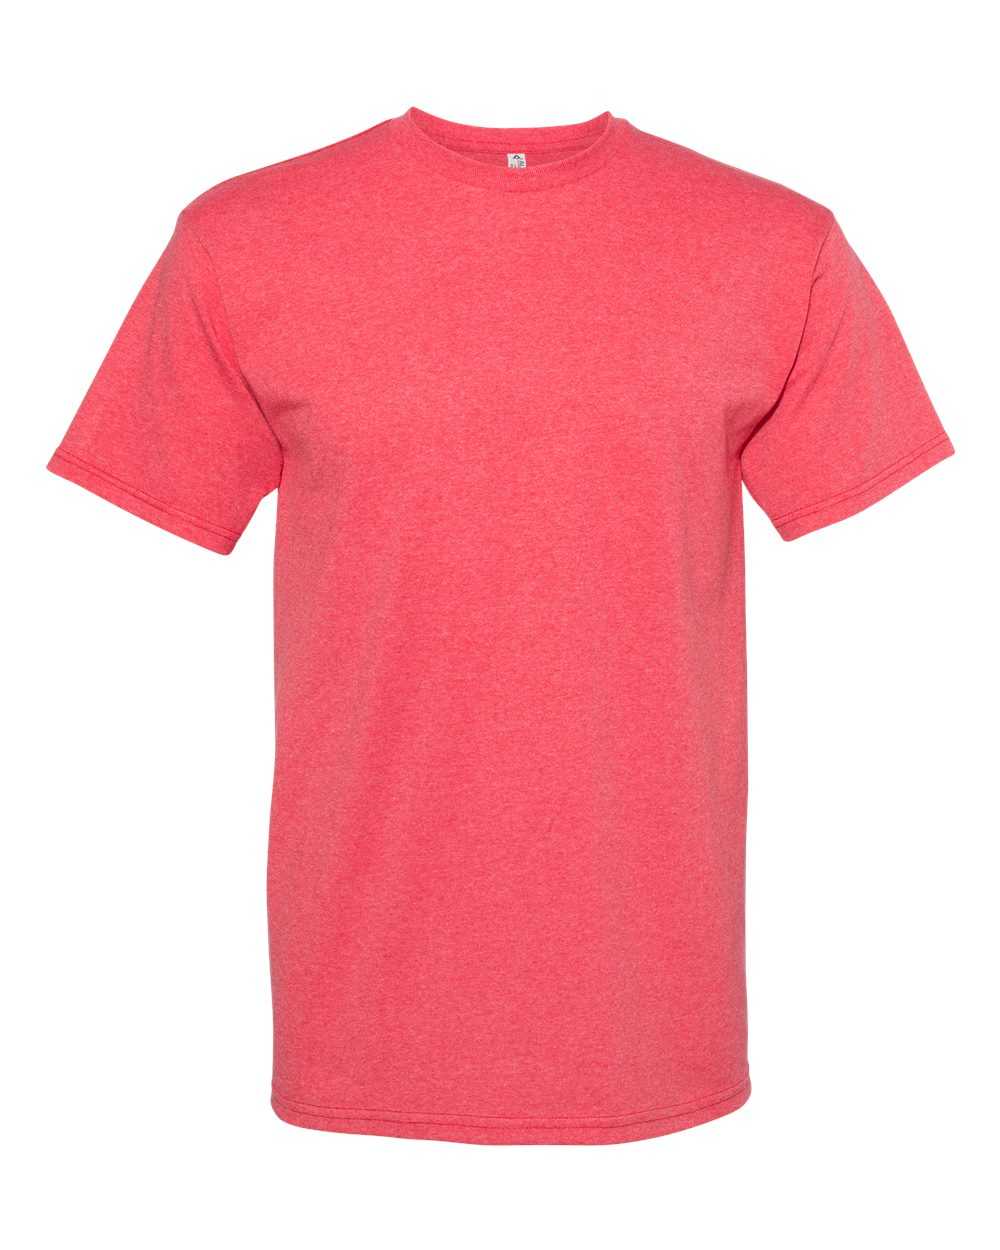 American Apparel 1701 Midweight Cotton Unisex T-Shirt - Red Heather - HIT a Double